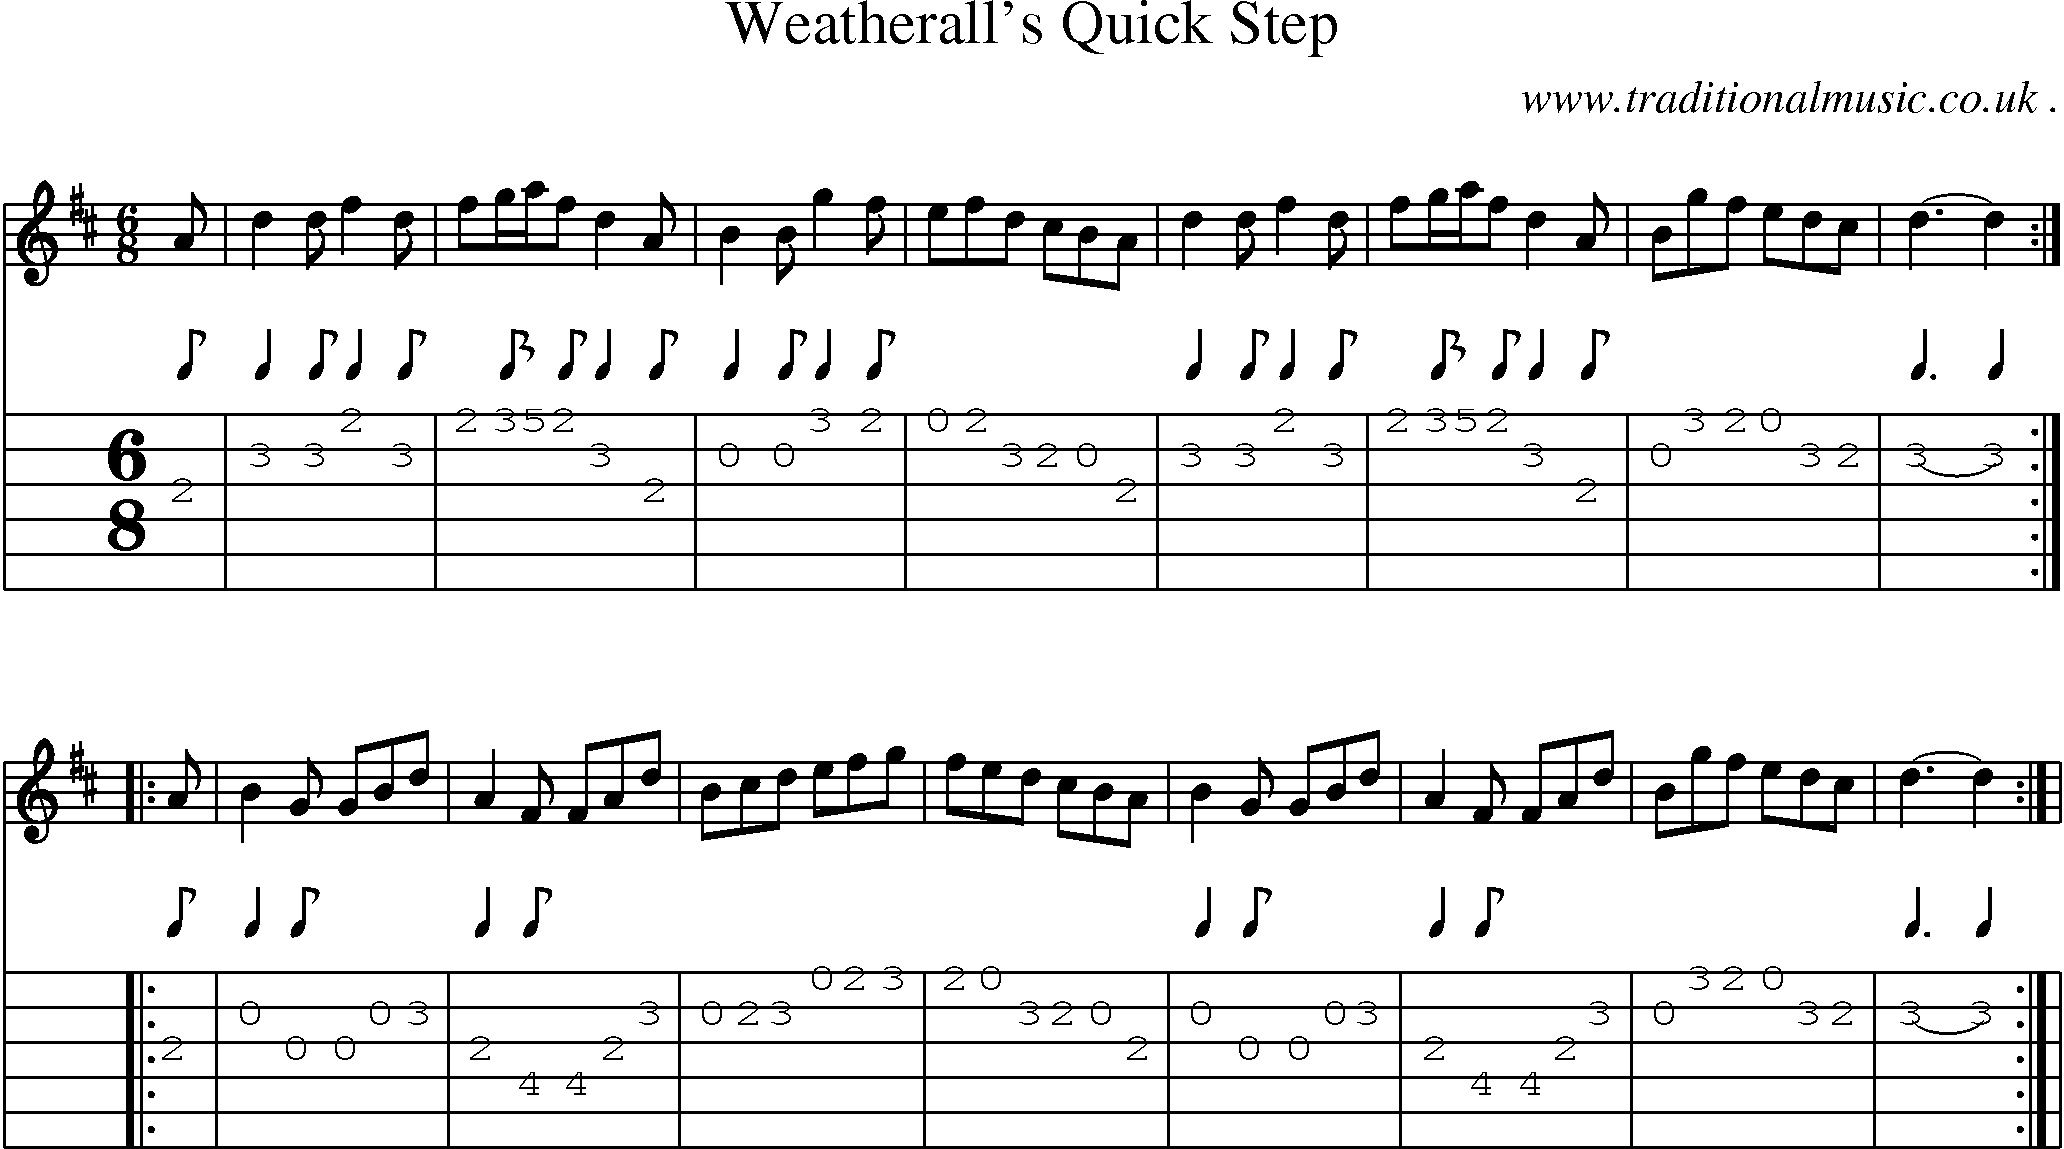 Sheet-Music and Guitar Tabs for Weatheralls Quick Step